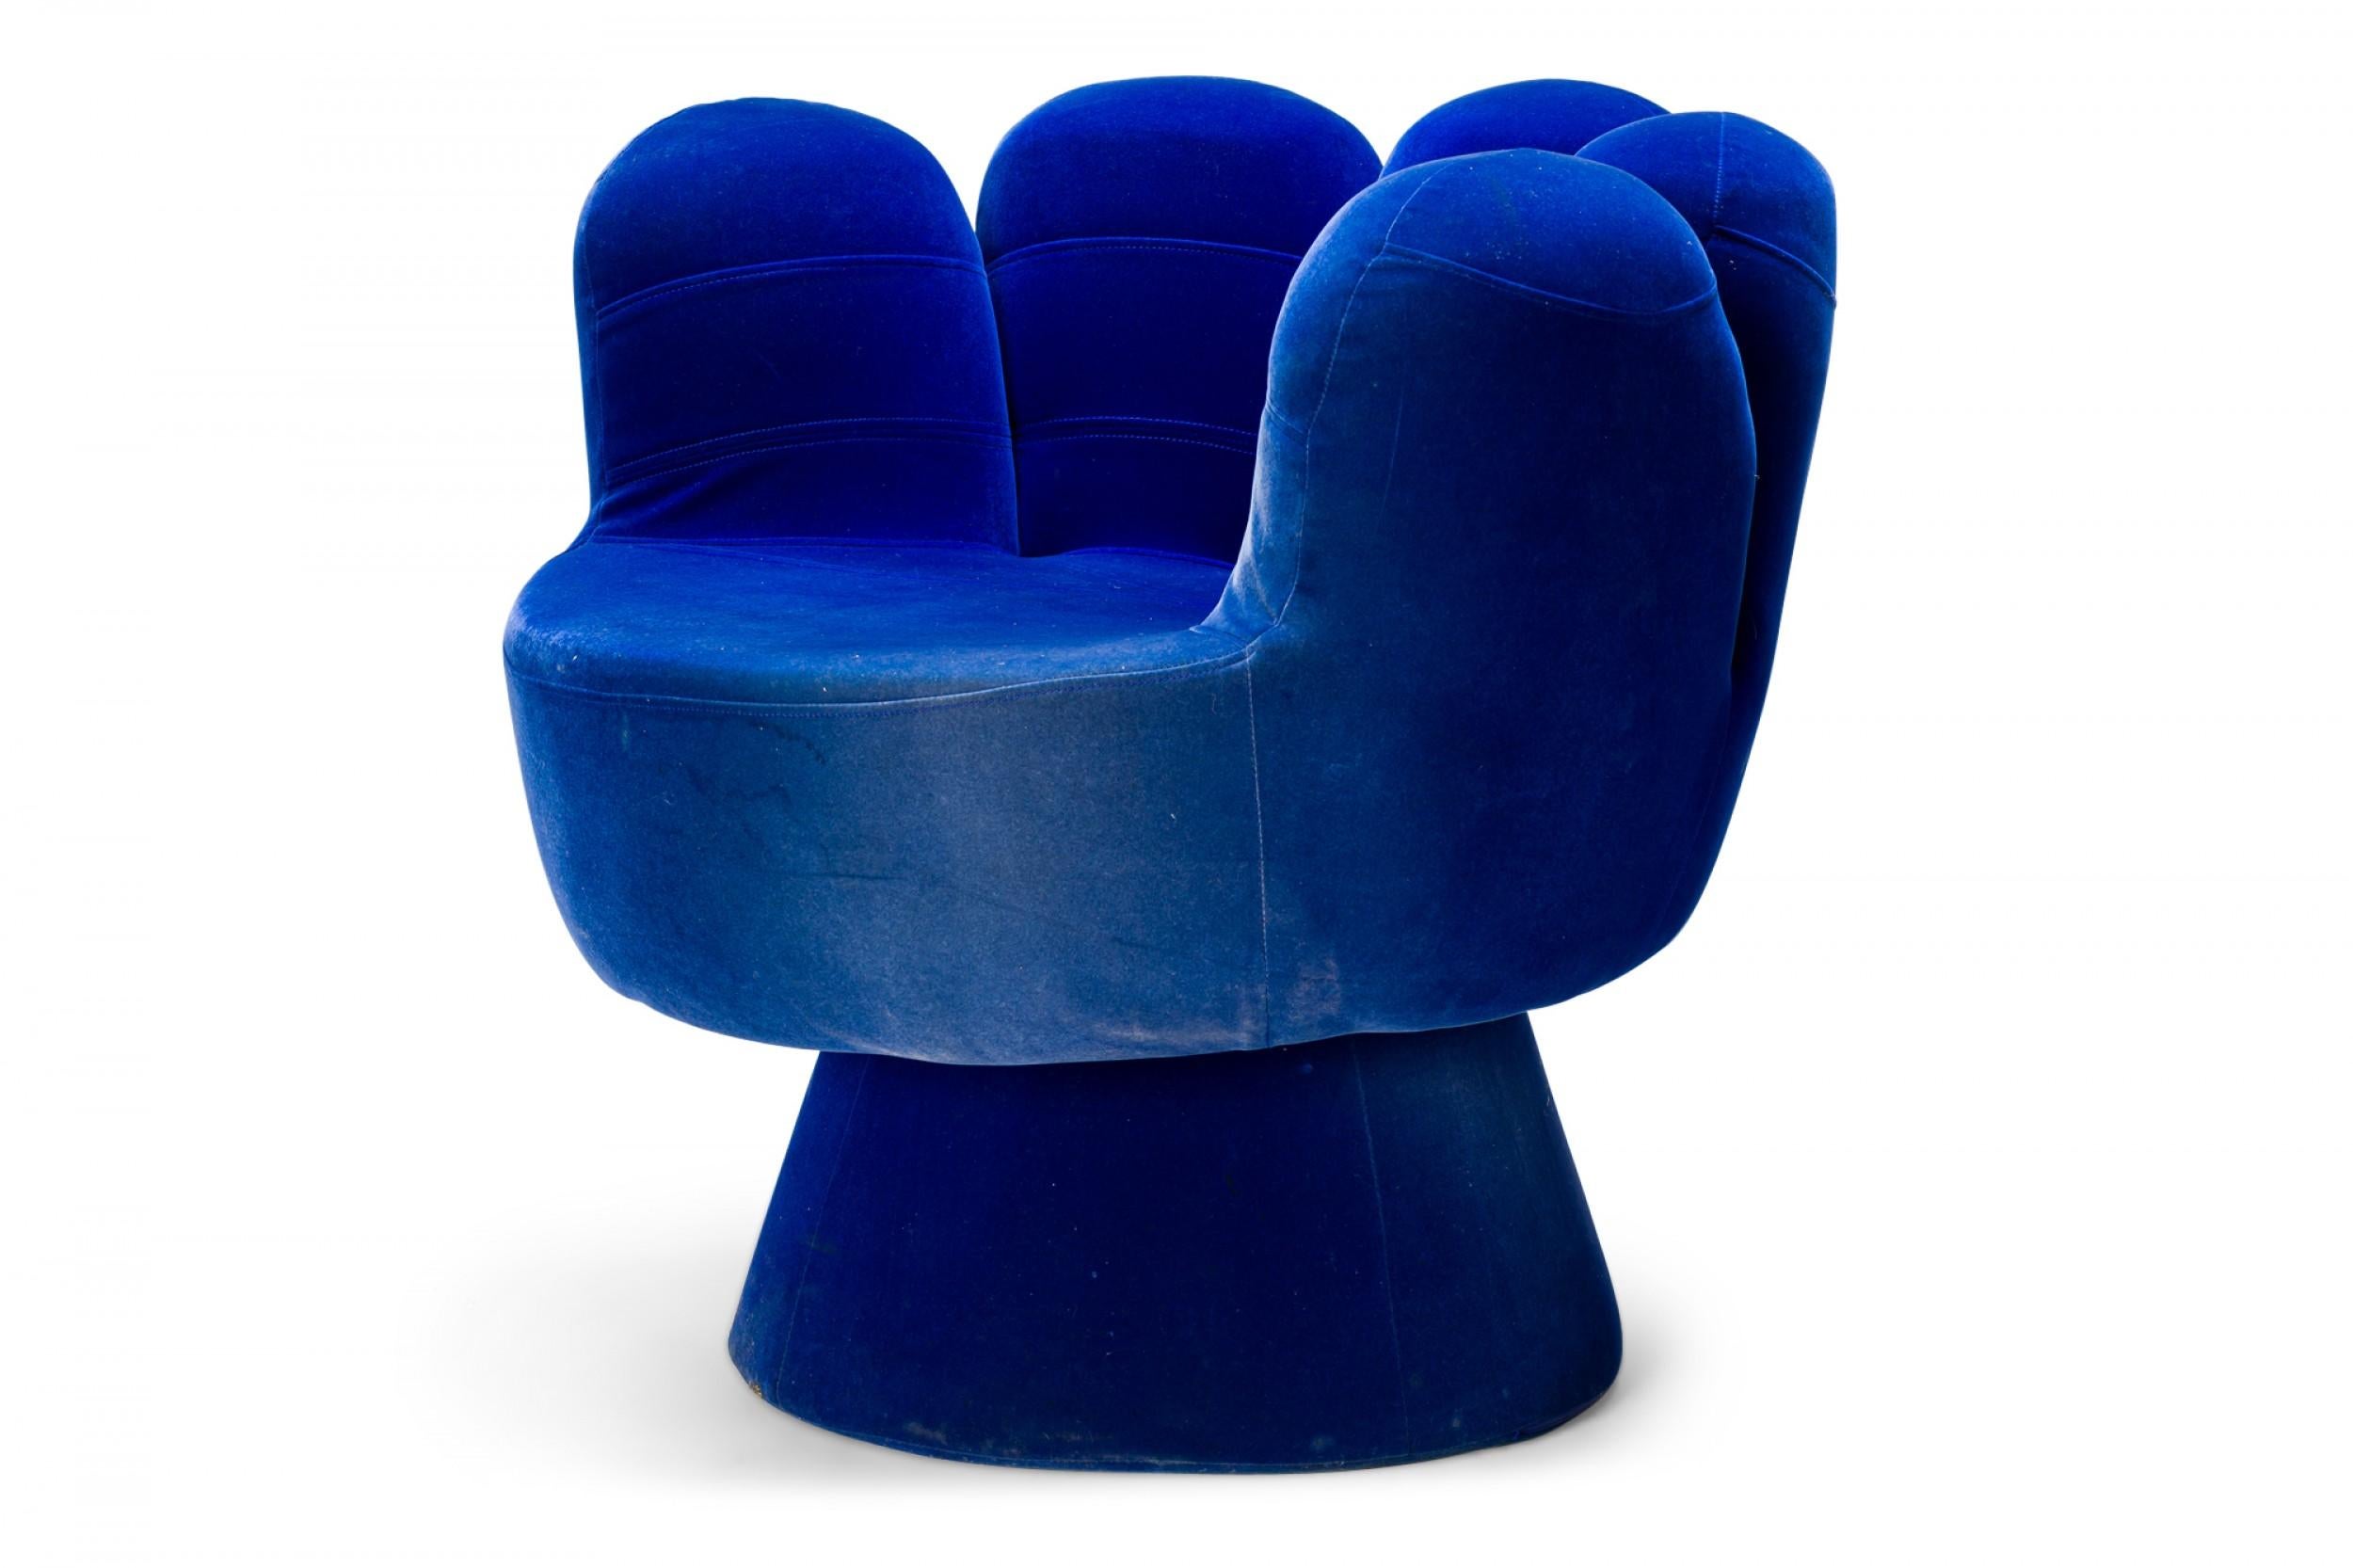 American Mid-Century Pop Art-style 'hand' chair with royal blue velour upholstery and a backrest comprised of five 'fingers' resting on a circular pedestal base.